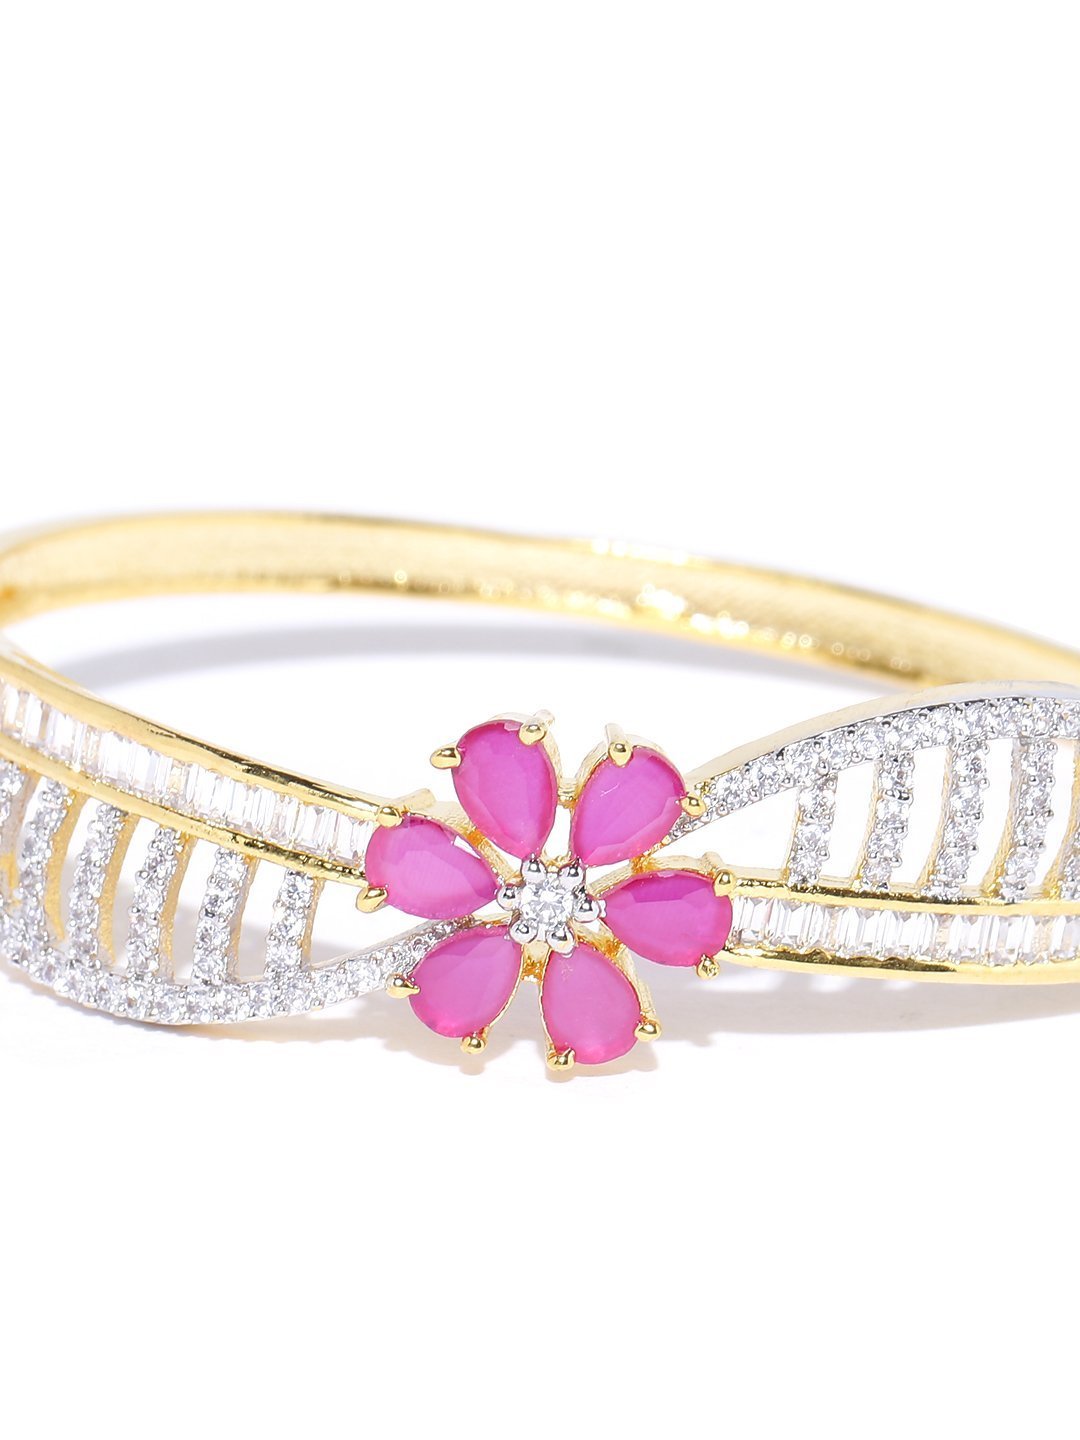 Women's Gold-Plated American Diamond and Ruby Studded Floral Patterned Bracelet in Pink Color - Priyaasi